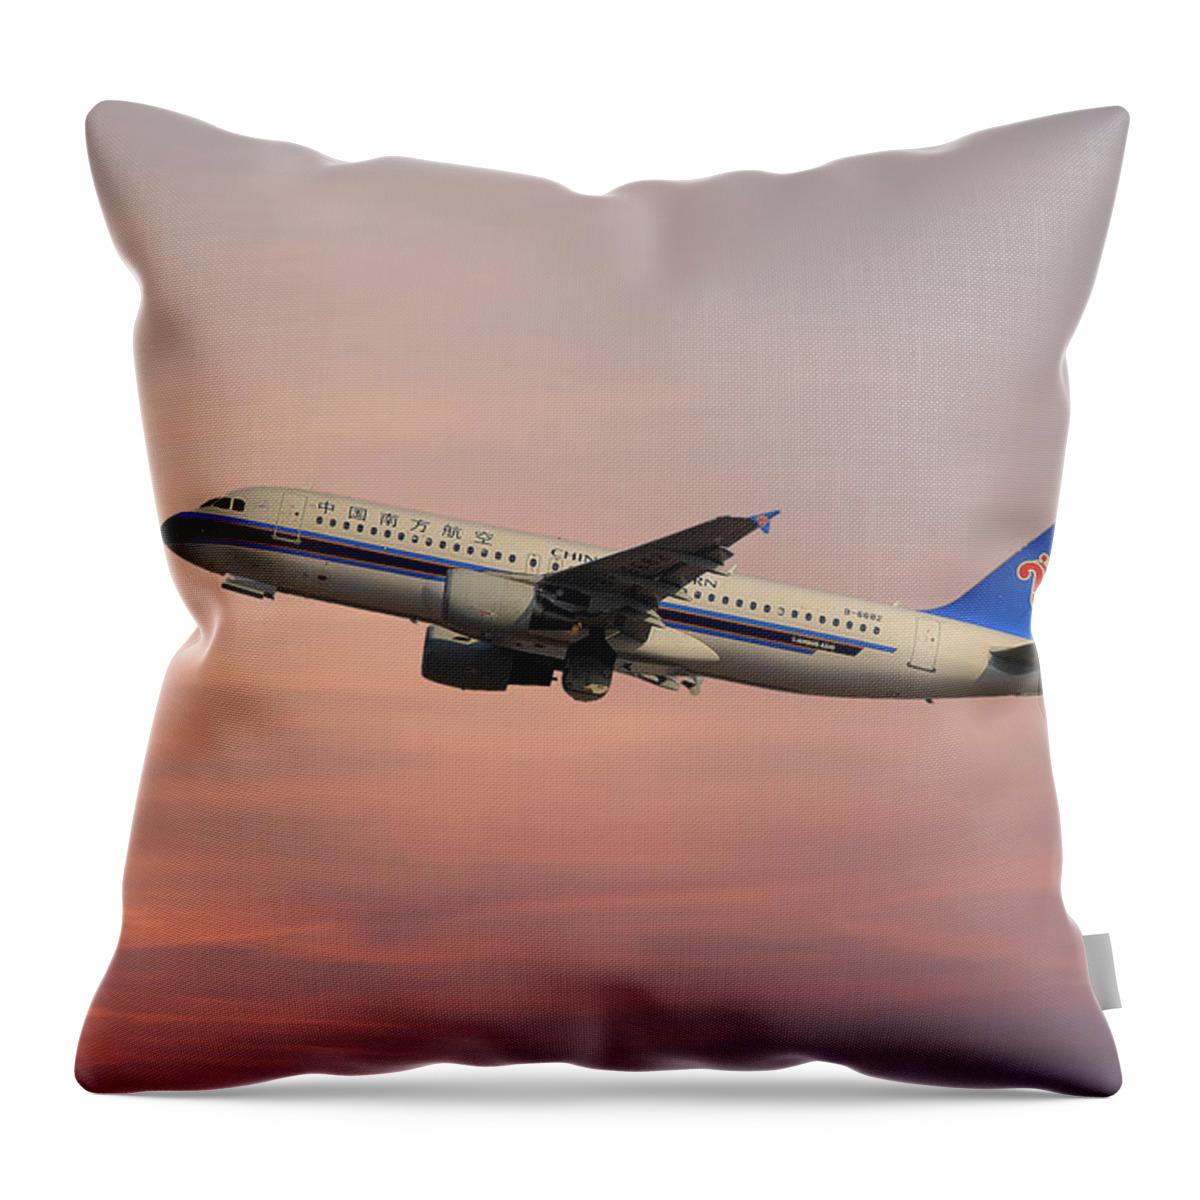 China Southern Airlines Throw Pillow featuring the photograph China Southern Airlines Airbus A320-214 #9 by Smart Aviation